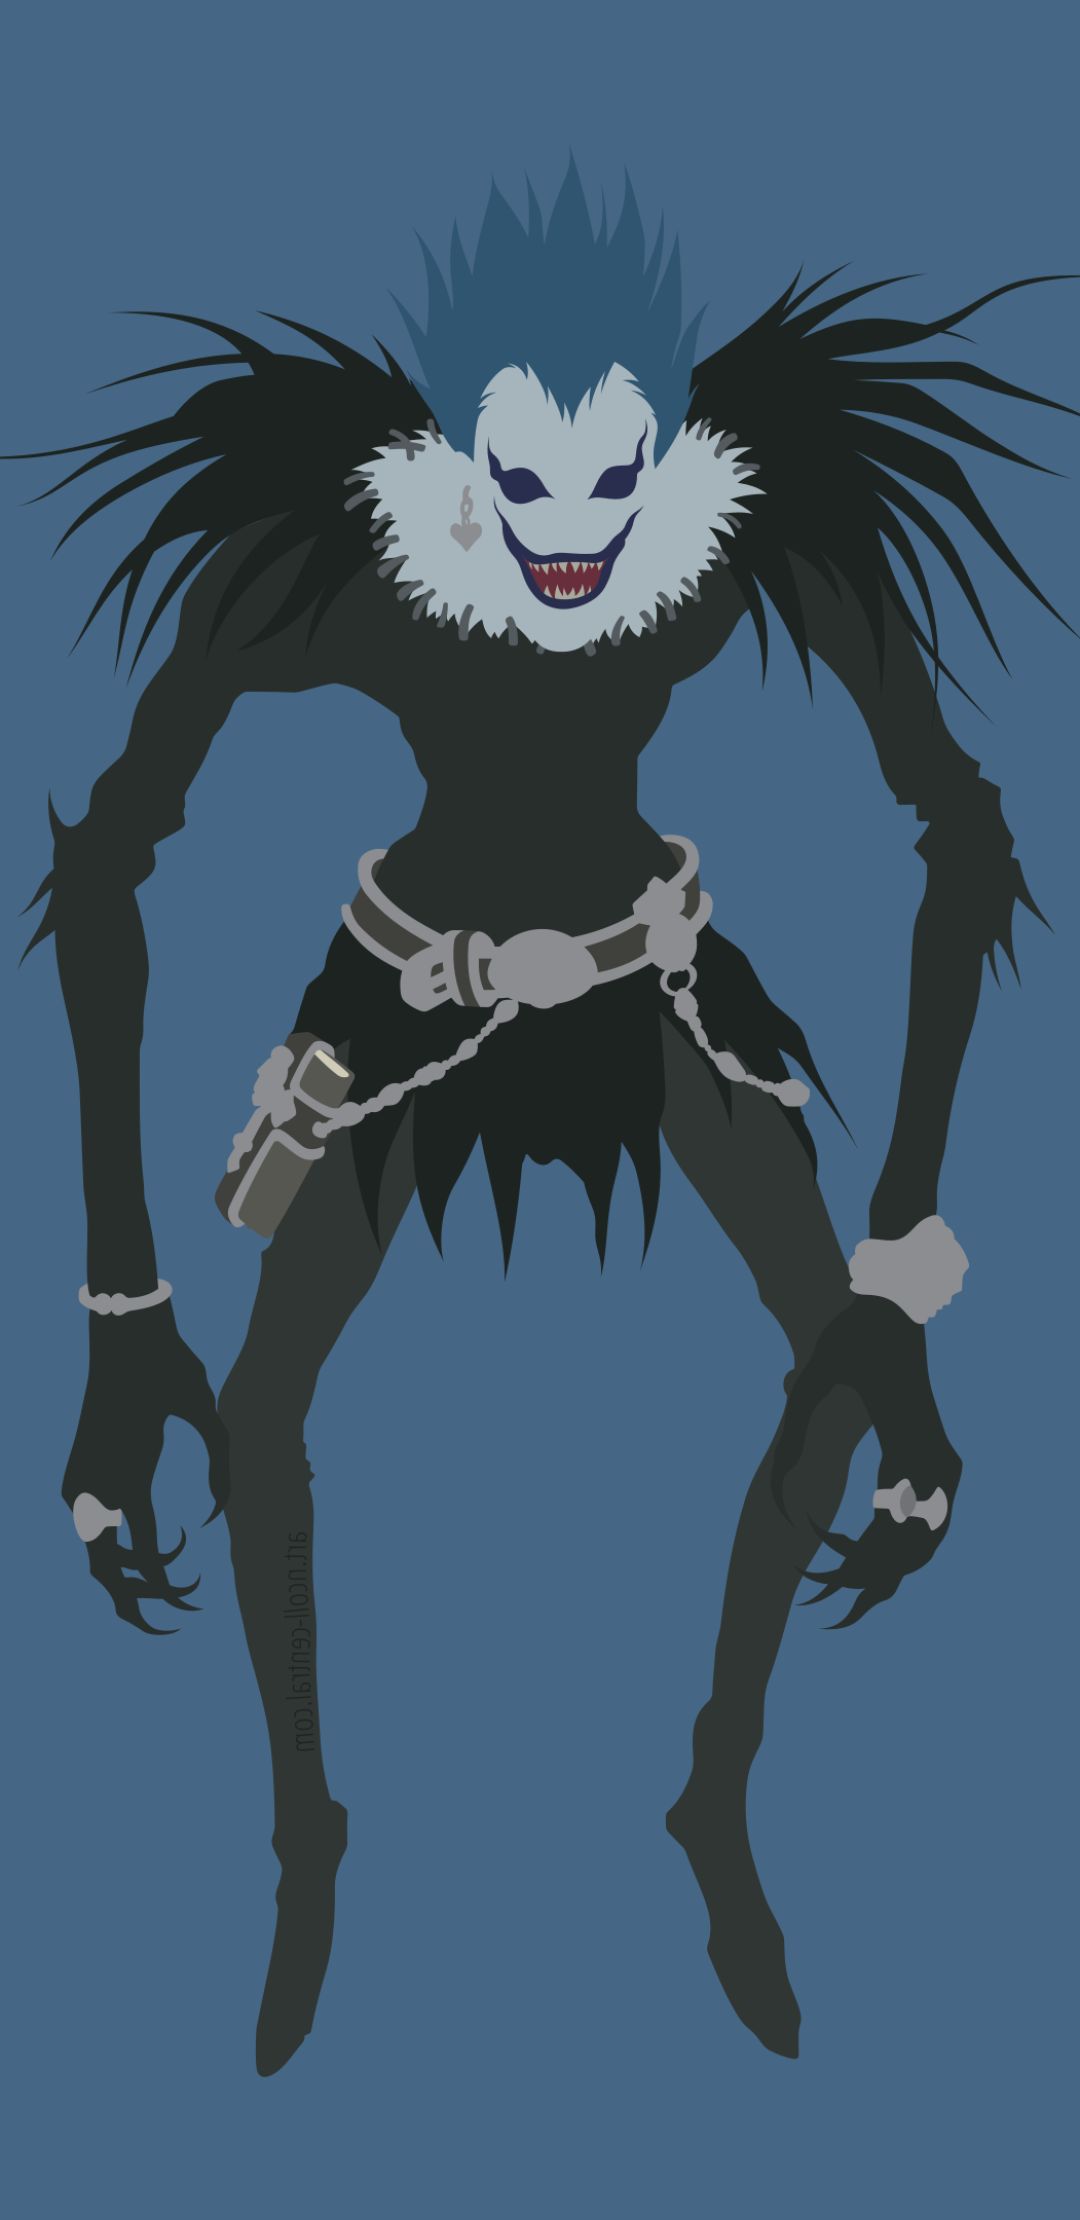 Mobile wallpaper: Anime, Death Note, Ryuk (Death Note), 1318235 download  the picture for free.